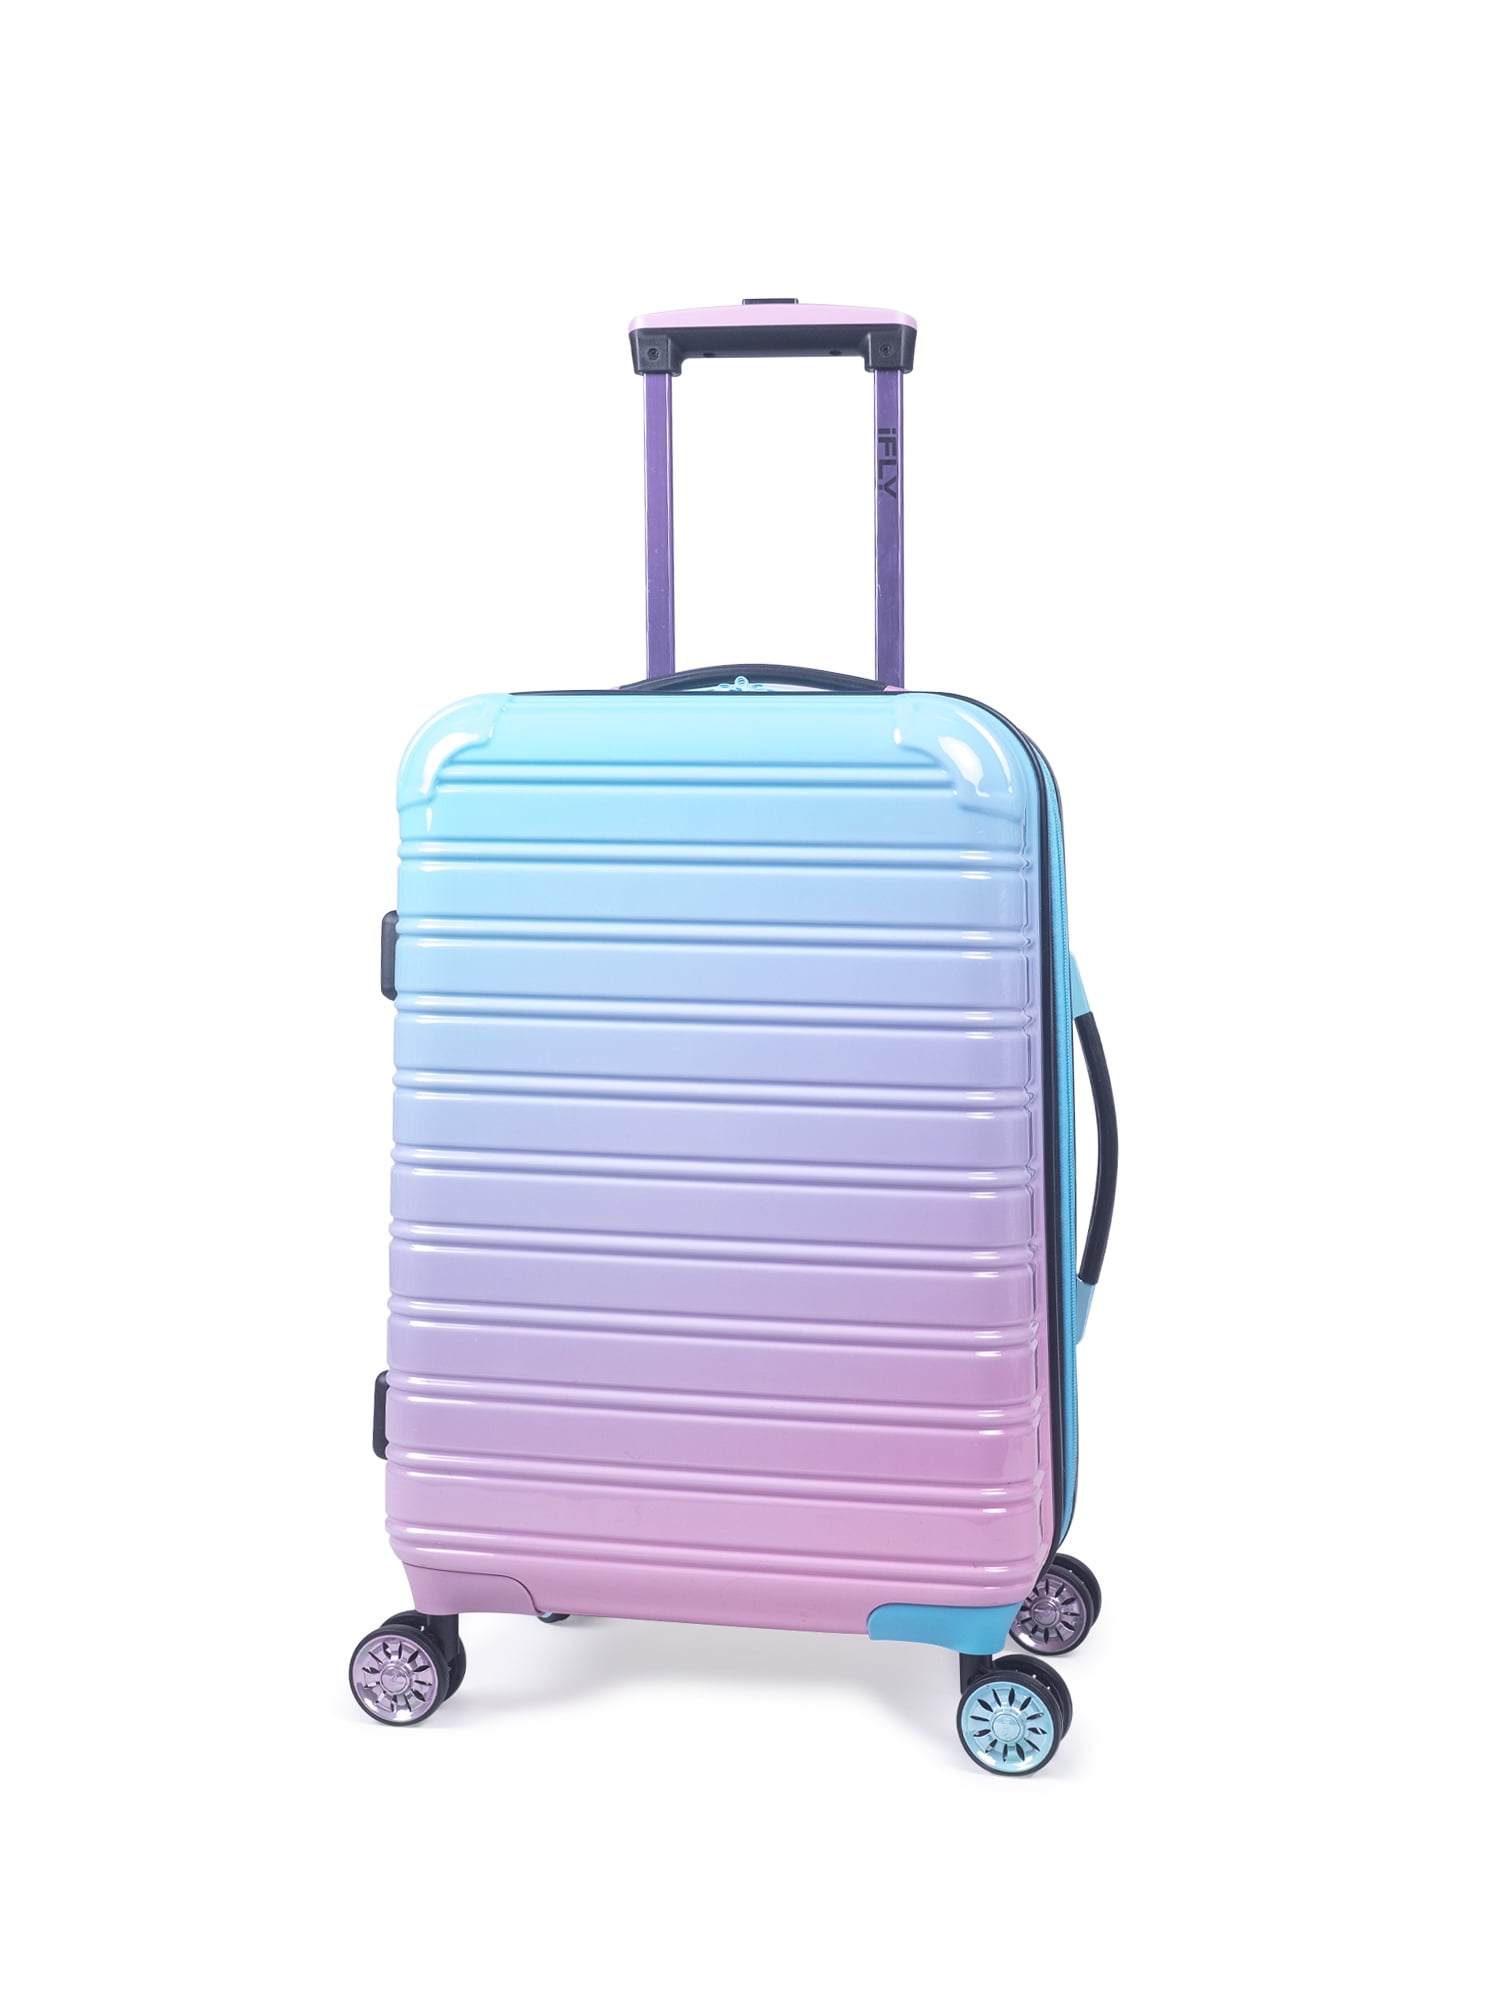 Buy Ifly Fibertech Cotton Candy Hardside Luggage 20 Inch Carry On Online At Lowest Price In